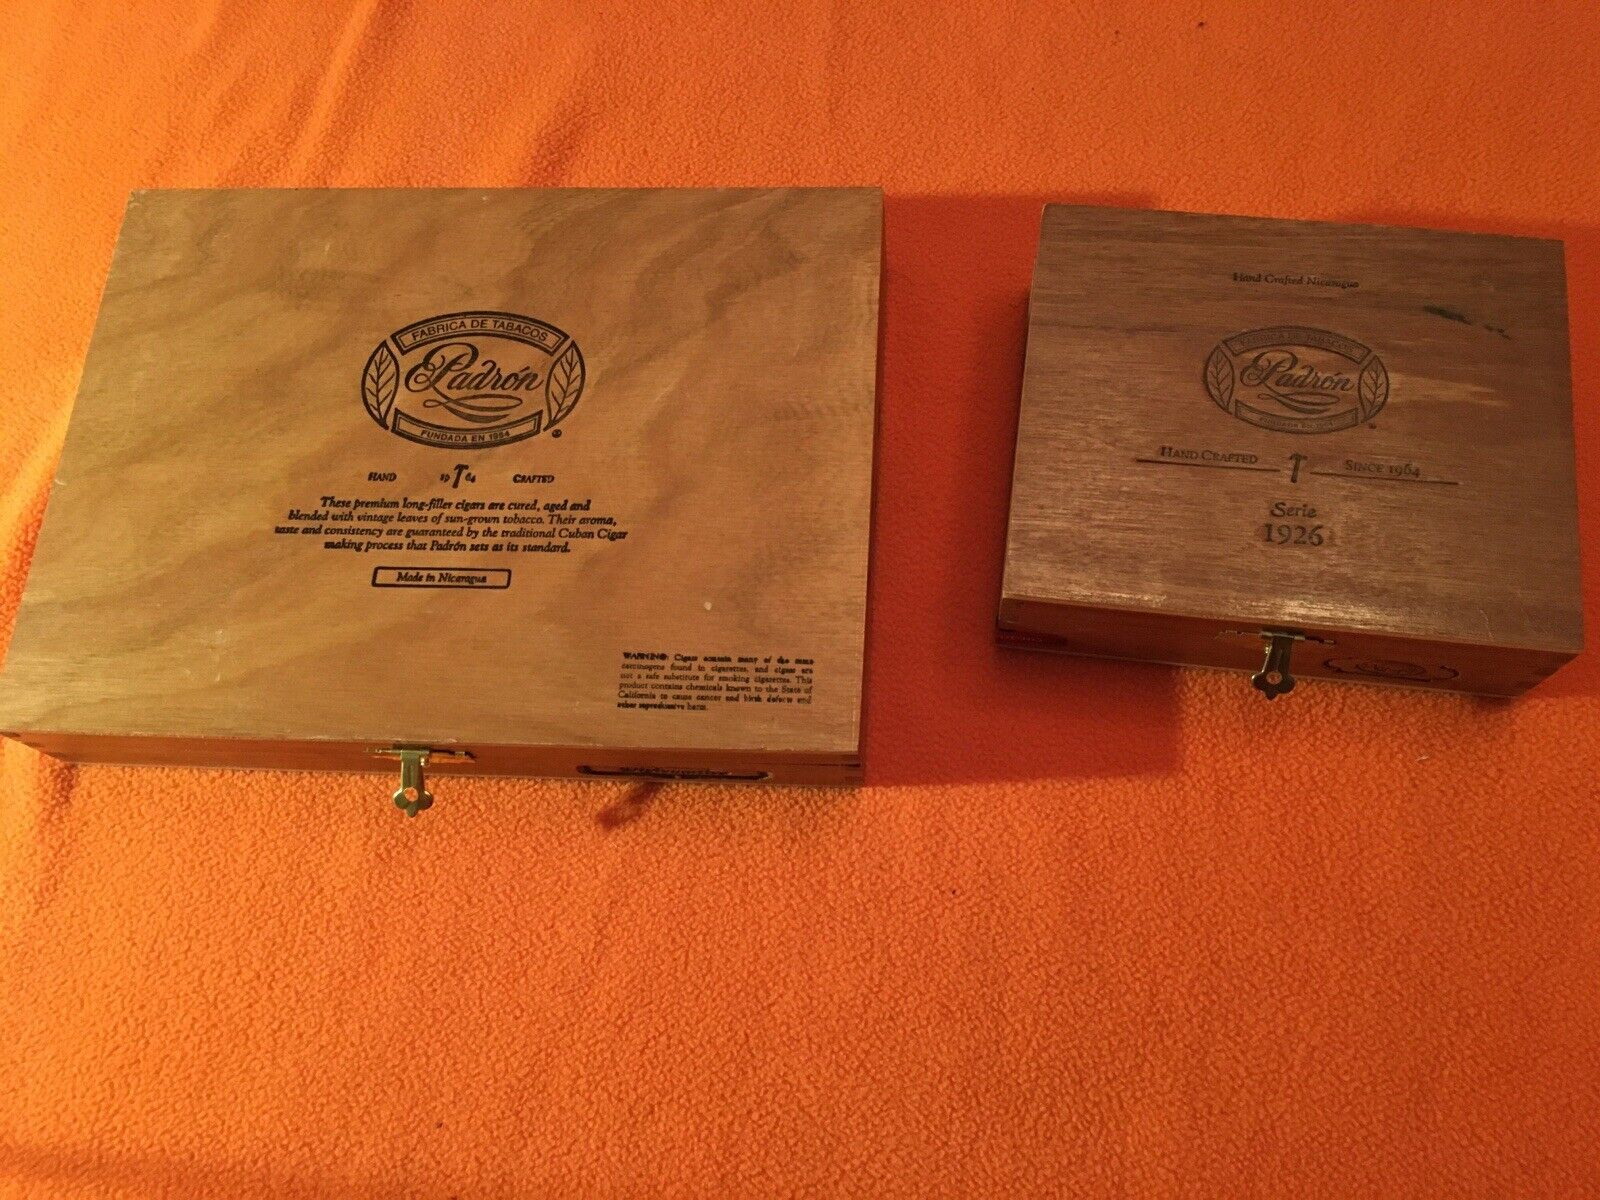 Padron Cigar Boxes Lot Of 2 Different Sizes Series 1926 No9 & Diplomatico